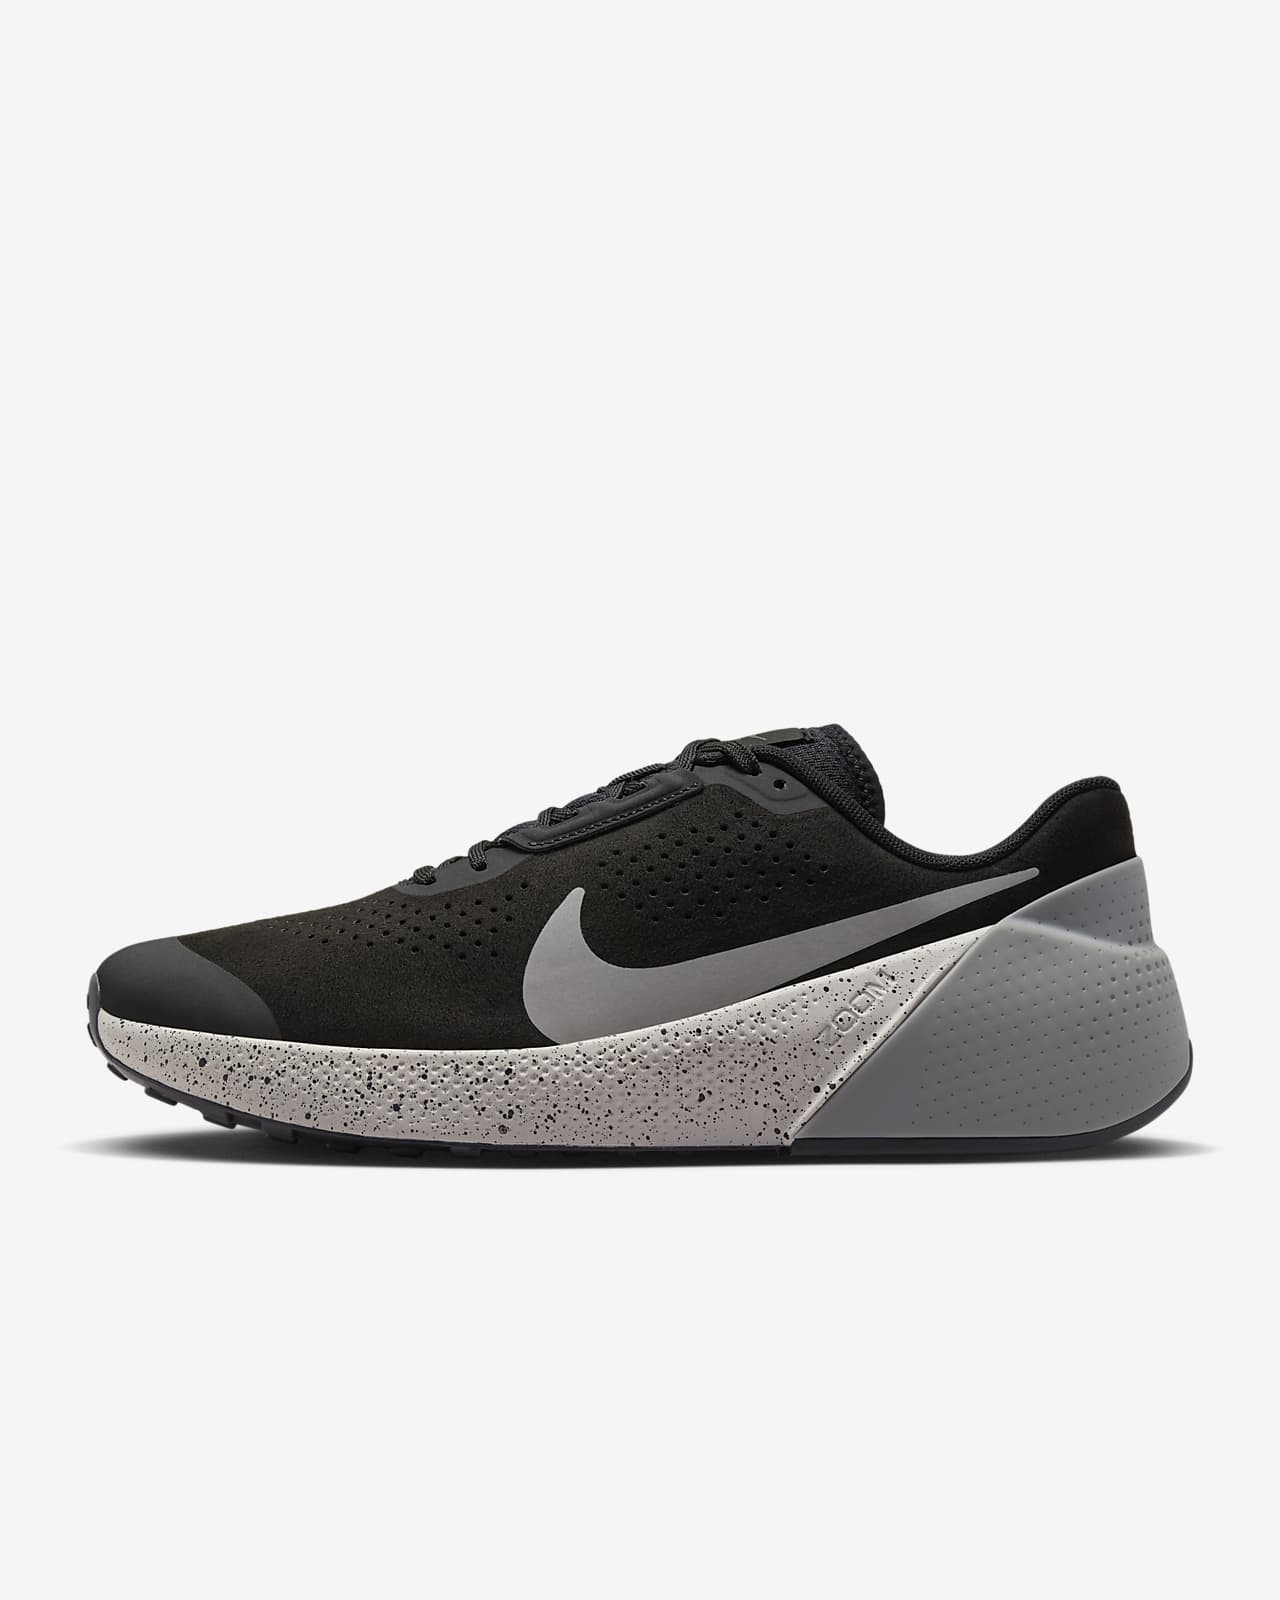 Nike Air Zoom TR 1 Men's Workout Shoes